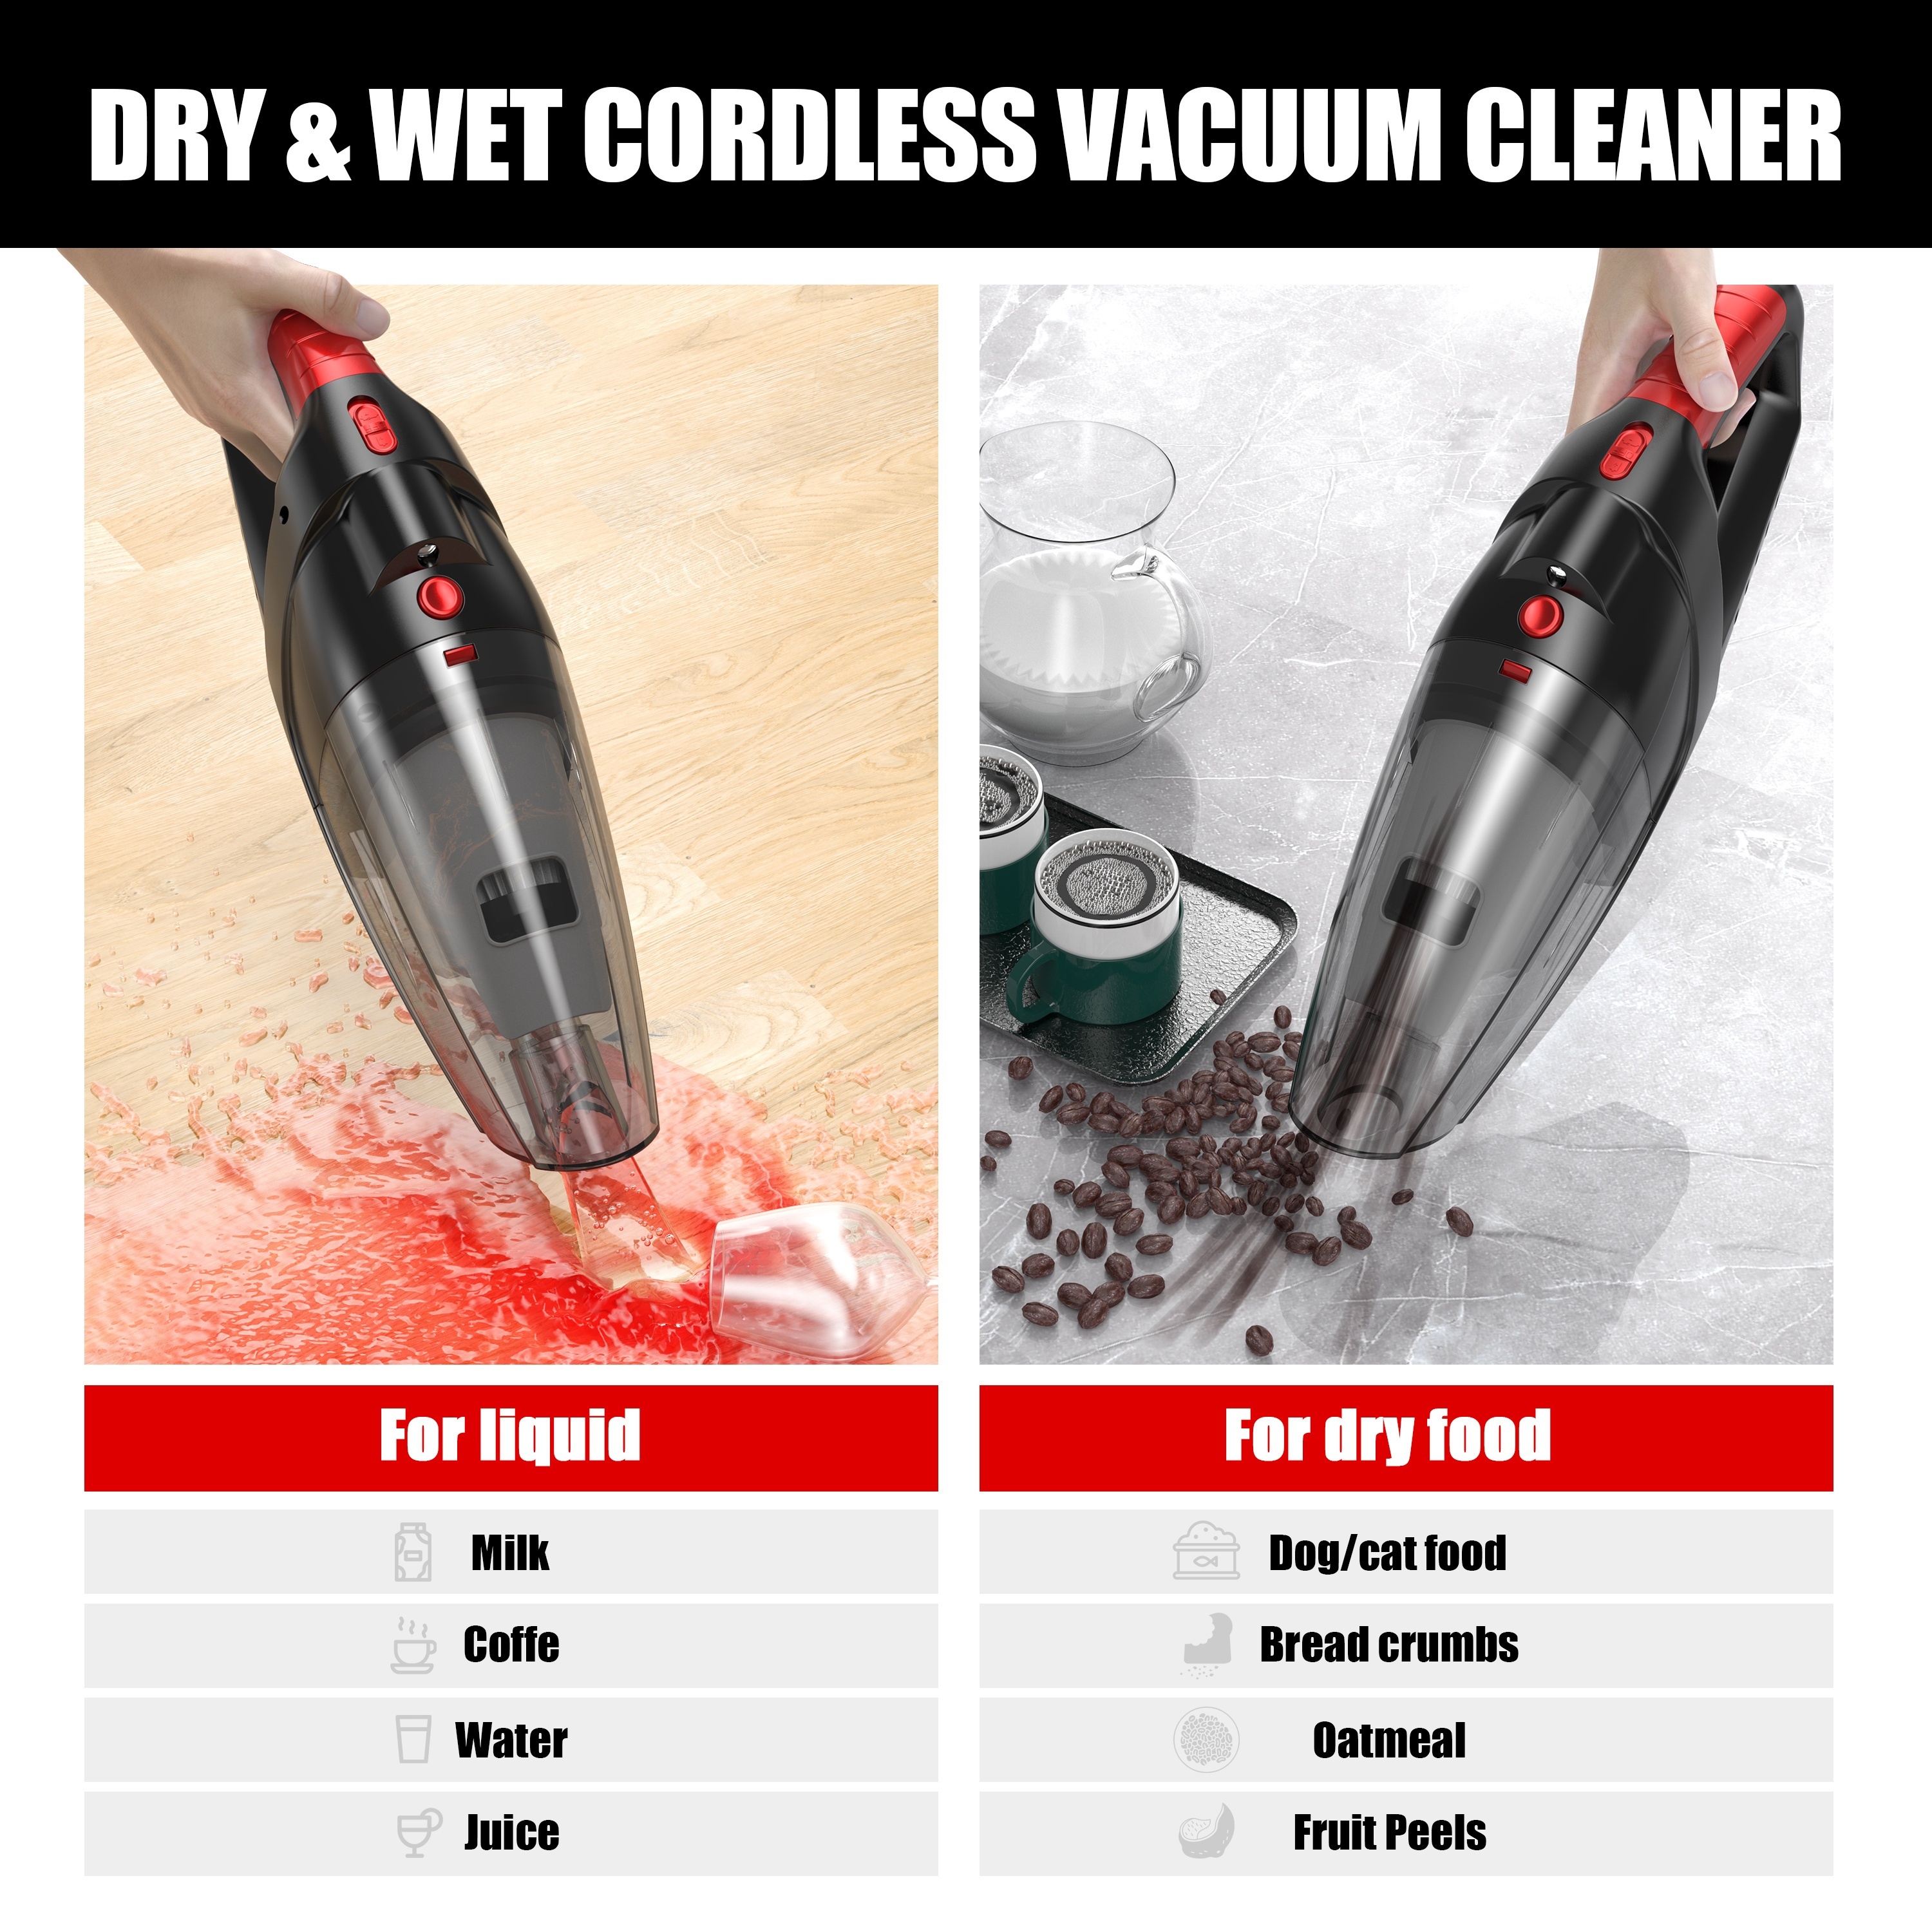 Hand Vacuum Cleaner Cordless Portable Handheld Vacuum Rechargeable